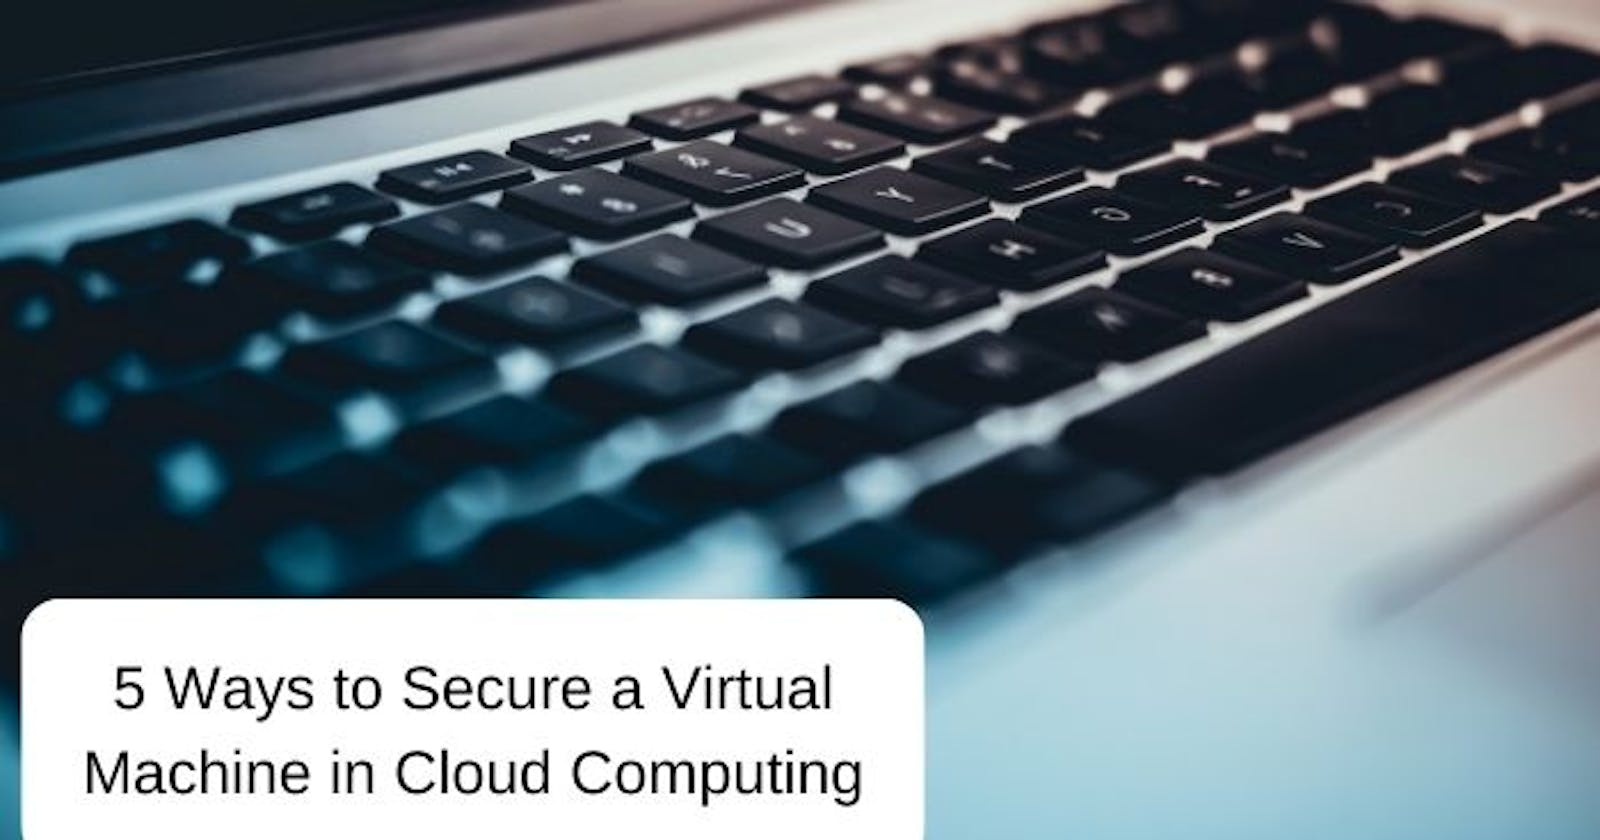 5 Ways to Secure a Virtual Machine in Cloud Computing